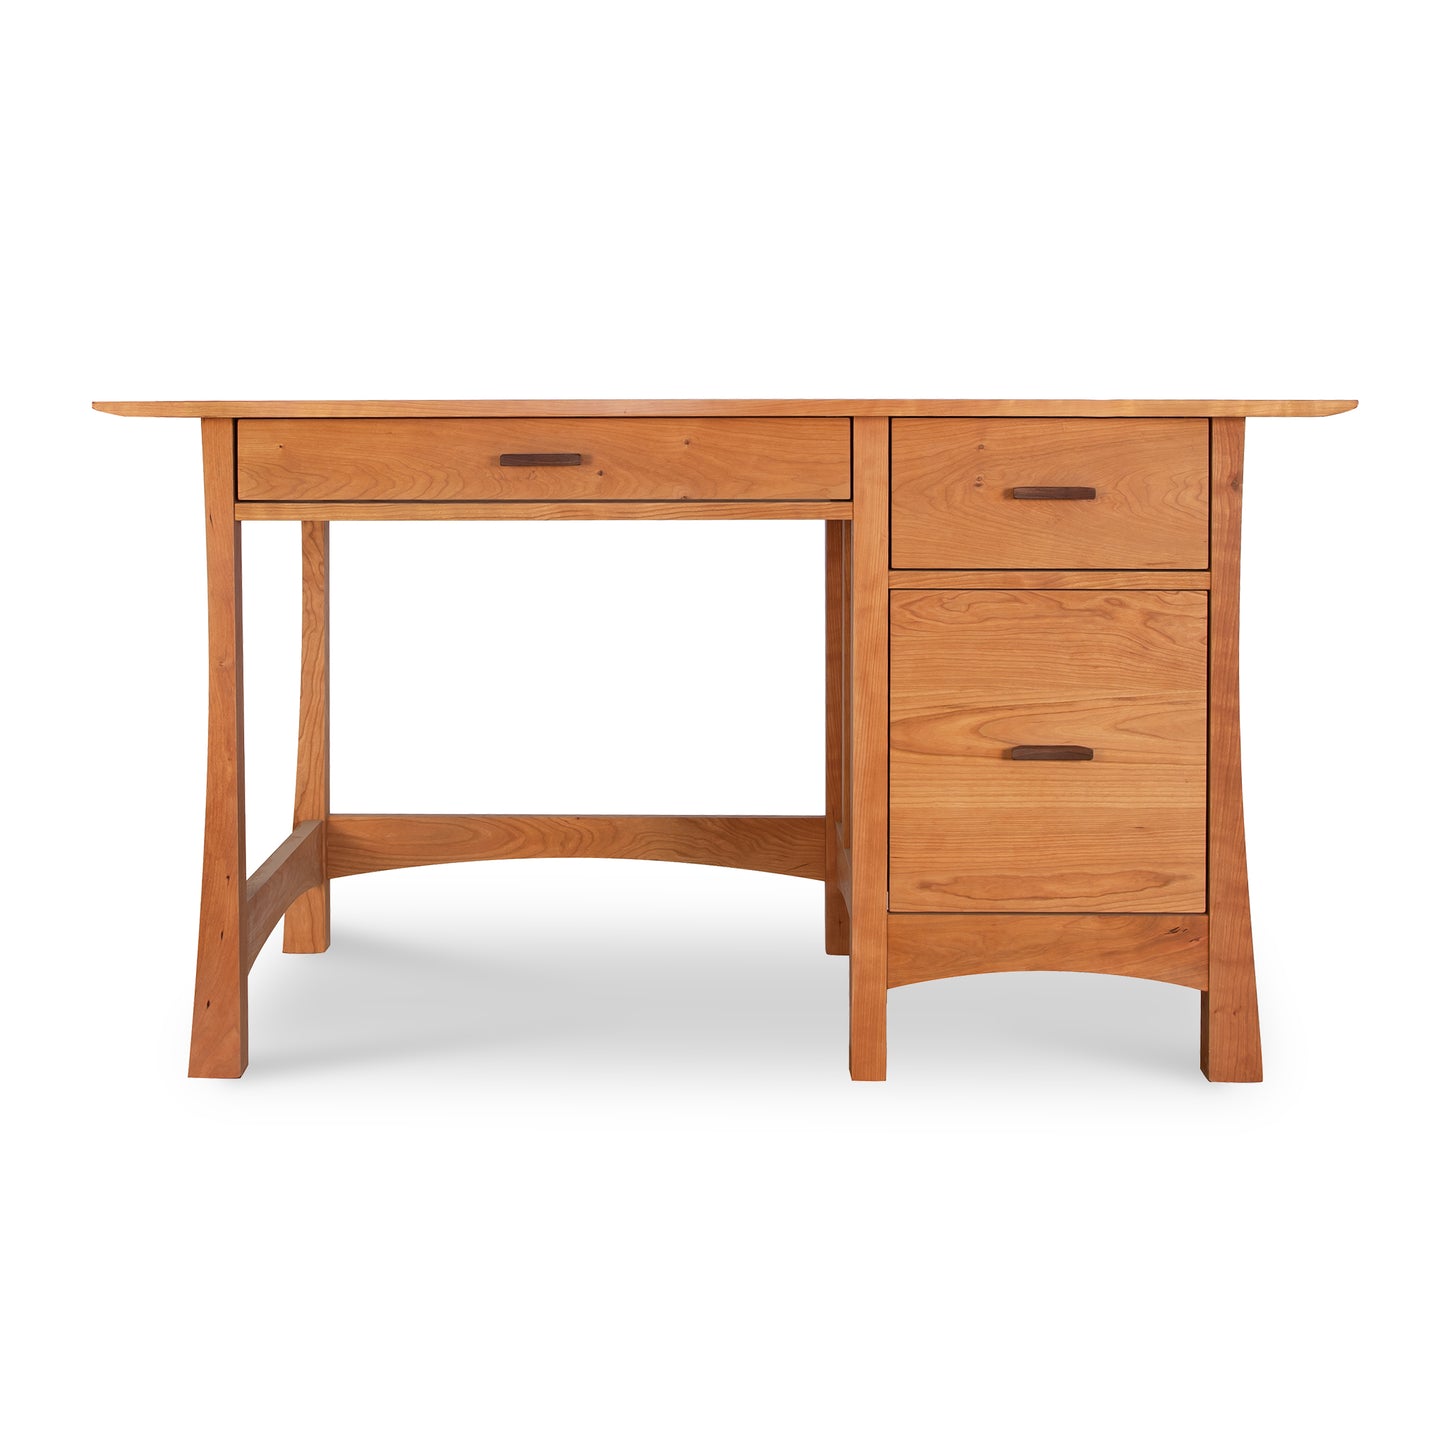 Vermont Furniture Designs Contemporary Craftsman Study Desk, solid wood desk with two drawers on one side, isolated on a white background.